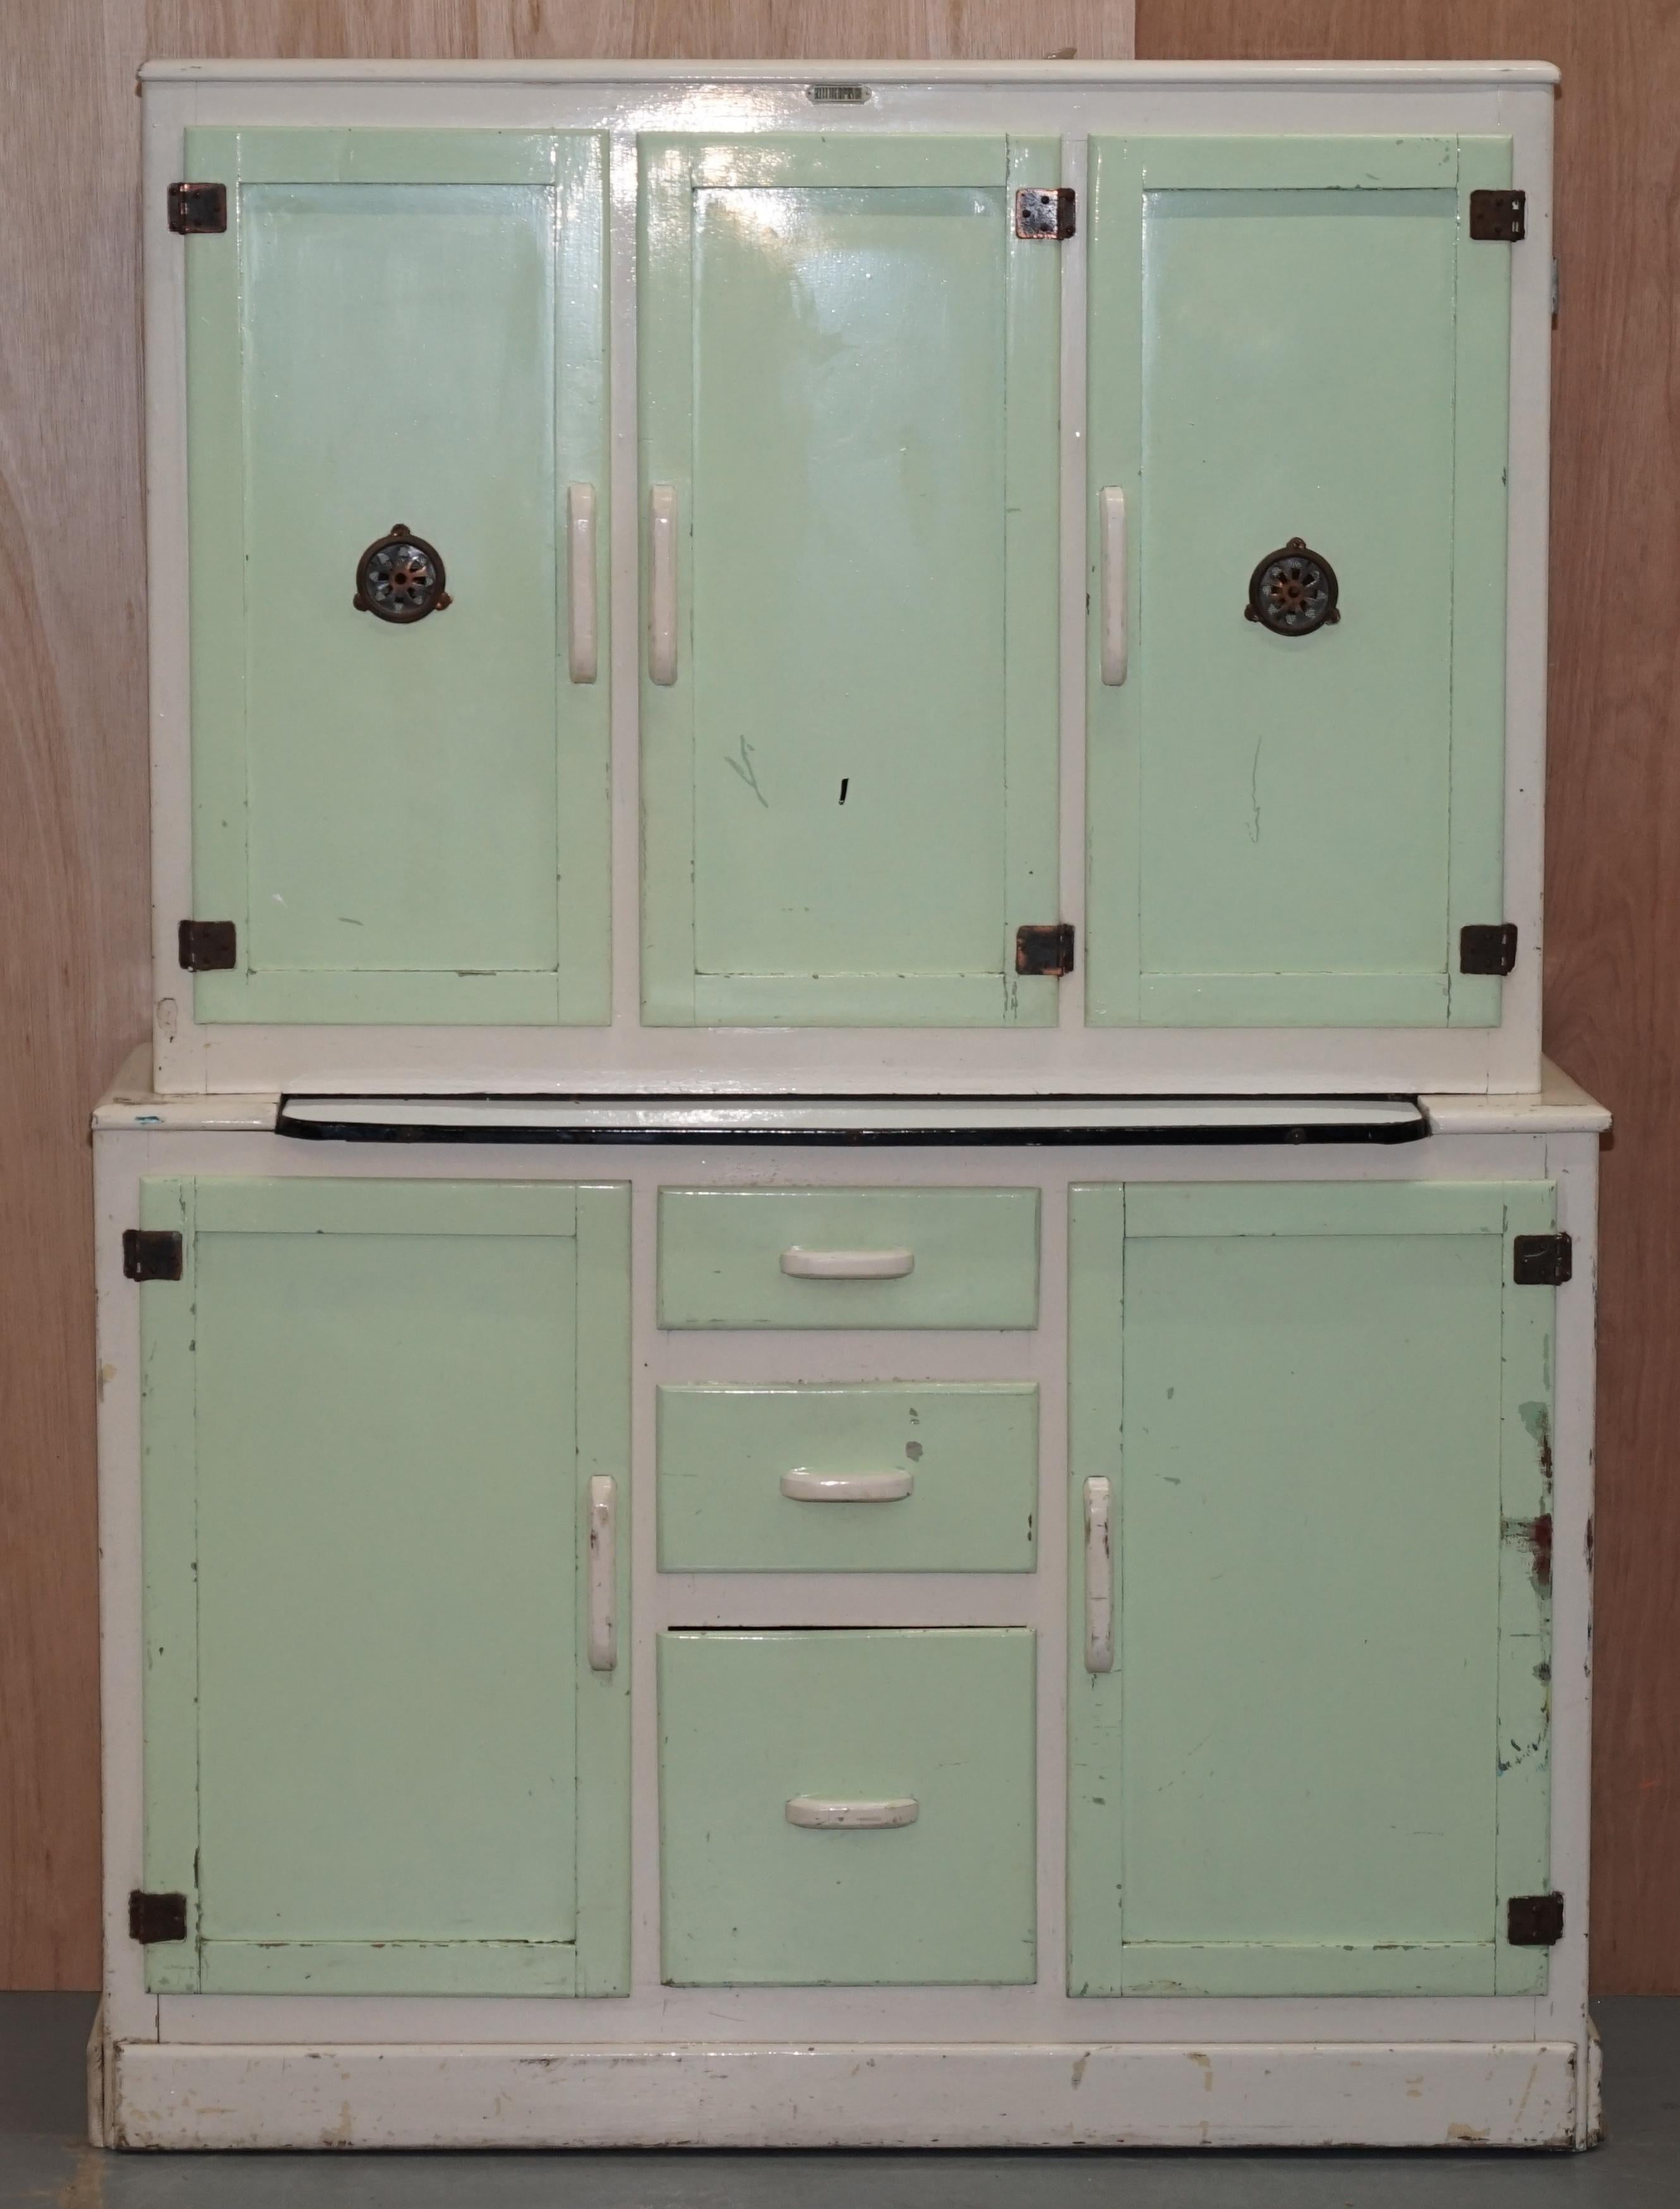 We are delighted to offer for sale this seriously cool Retro Mid-Century Modern KitchenPryde aqua and white larder cupboard

When I saw this piece I just had to buy it, it reminds me of my grandmother baking in my childhood, I absolutely love it